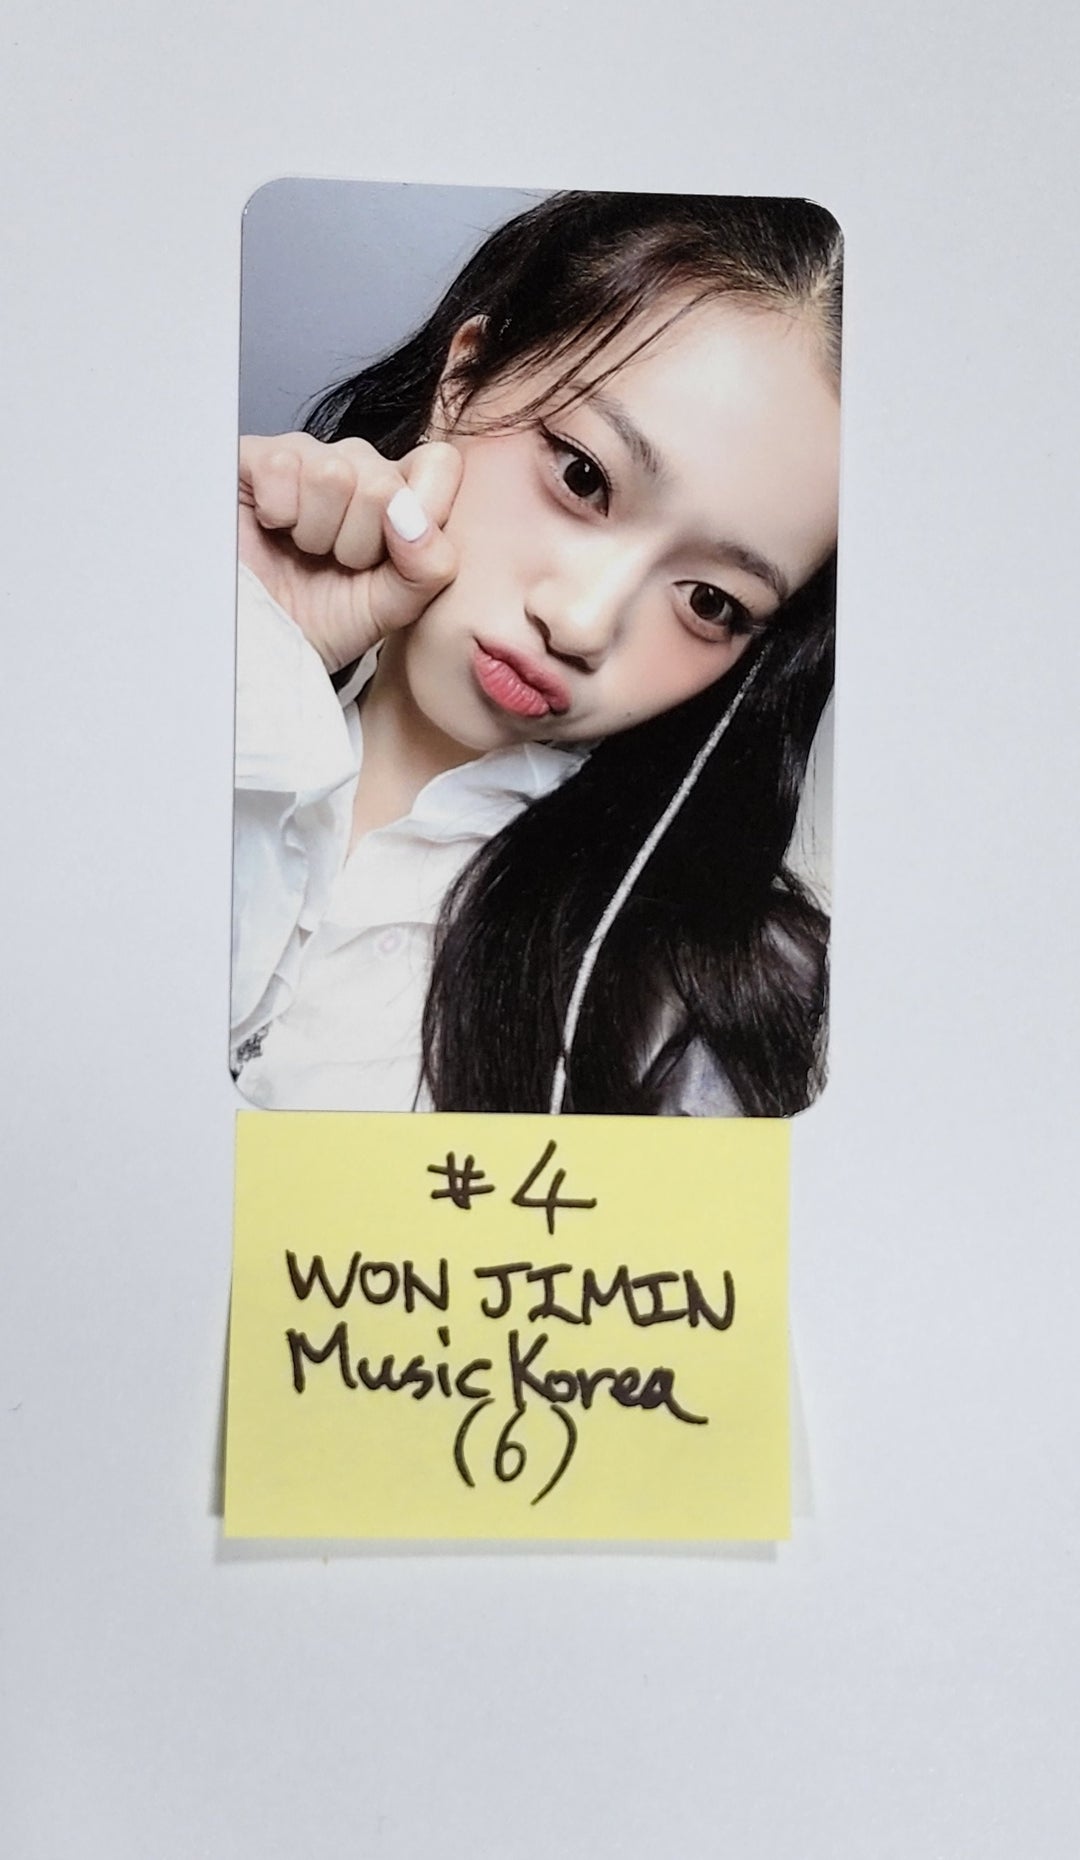 CLASS:y "CLASS IS OVER" - Music Korea Fansign Event Photocard